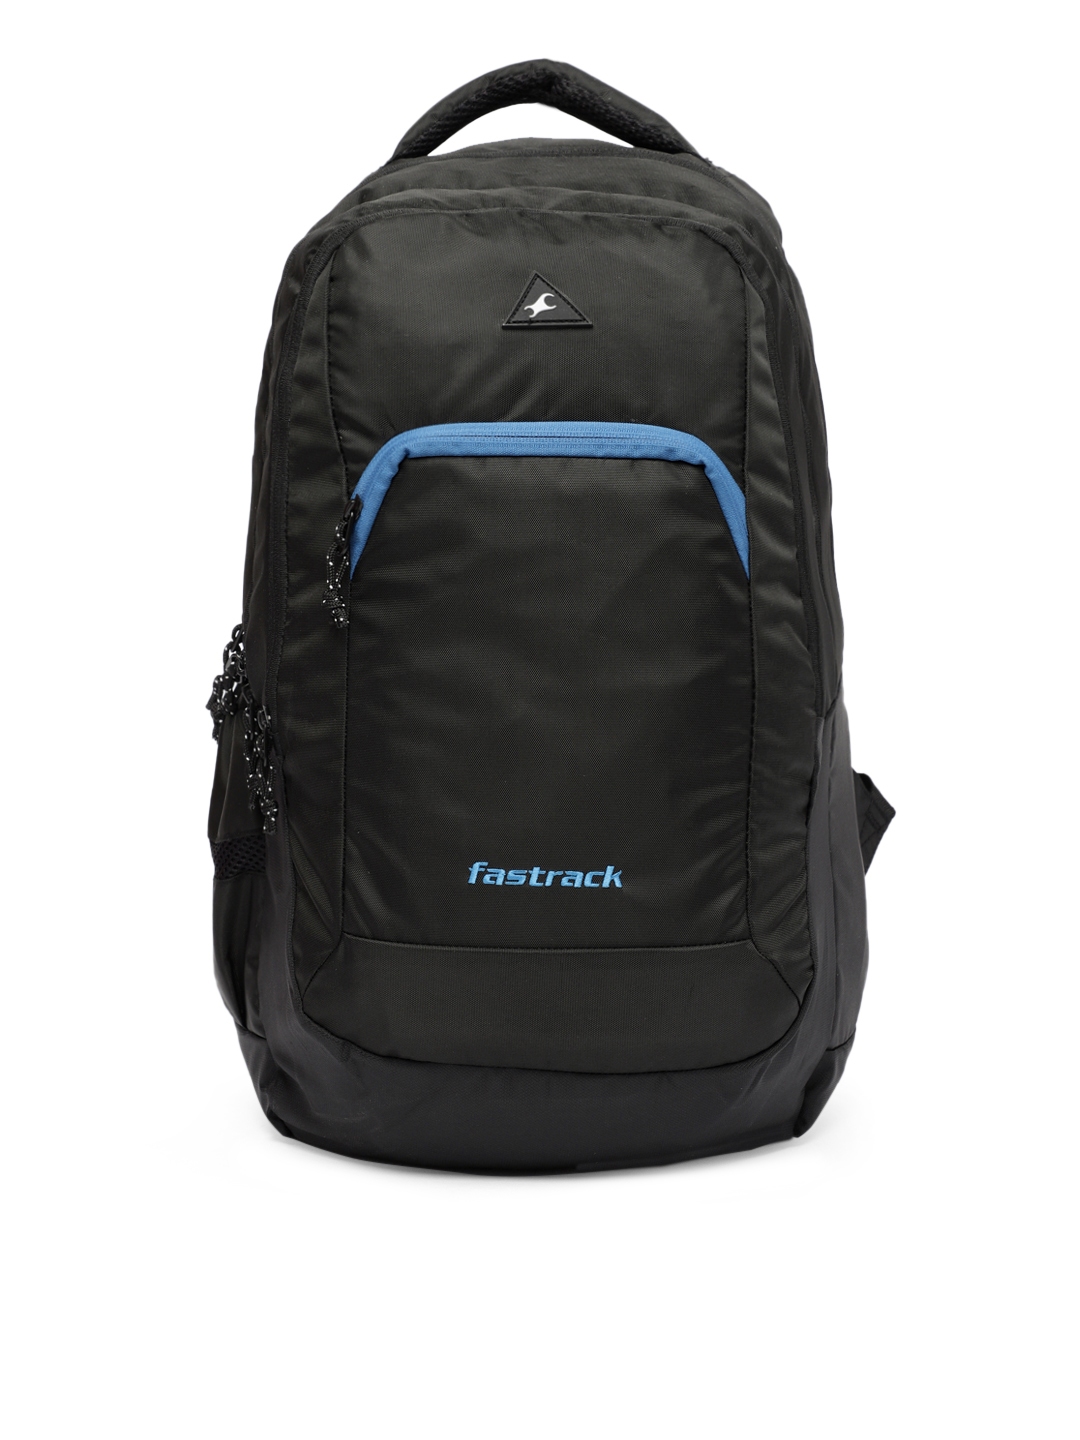 Fastrack Backpack Best Price in India | Fastrack Backpack Compare Price ...